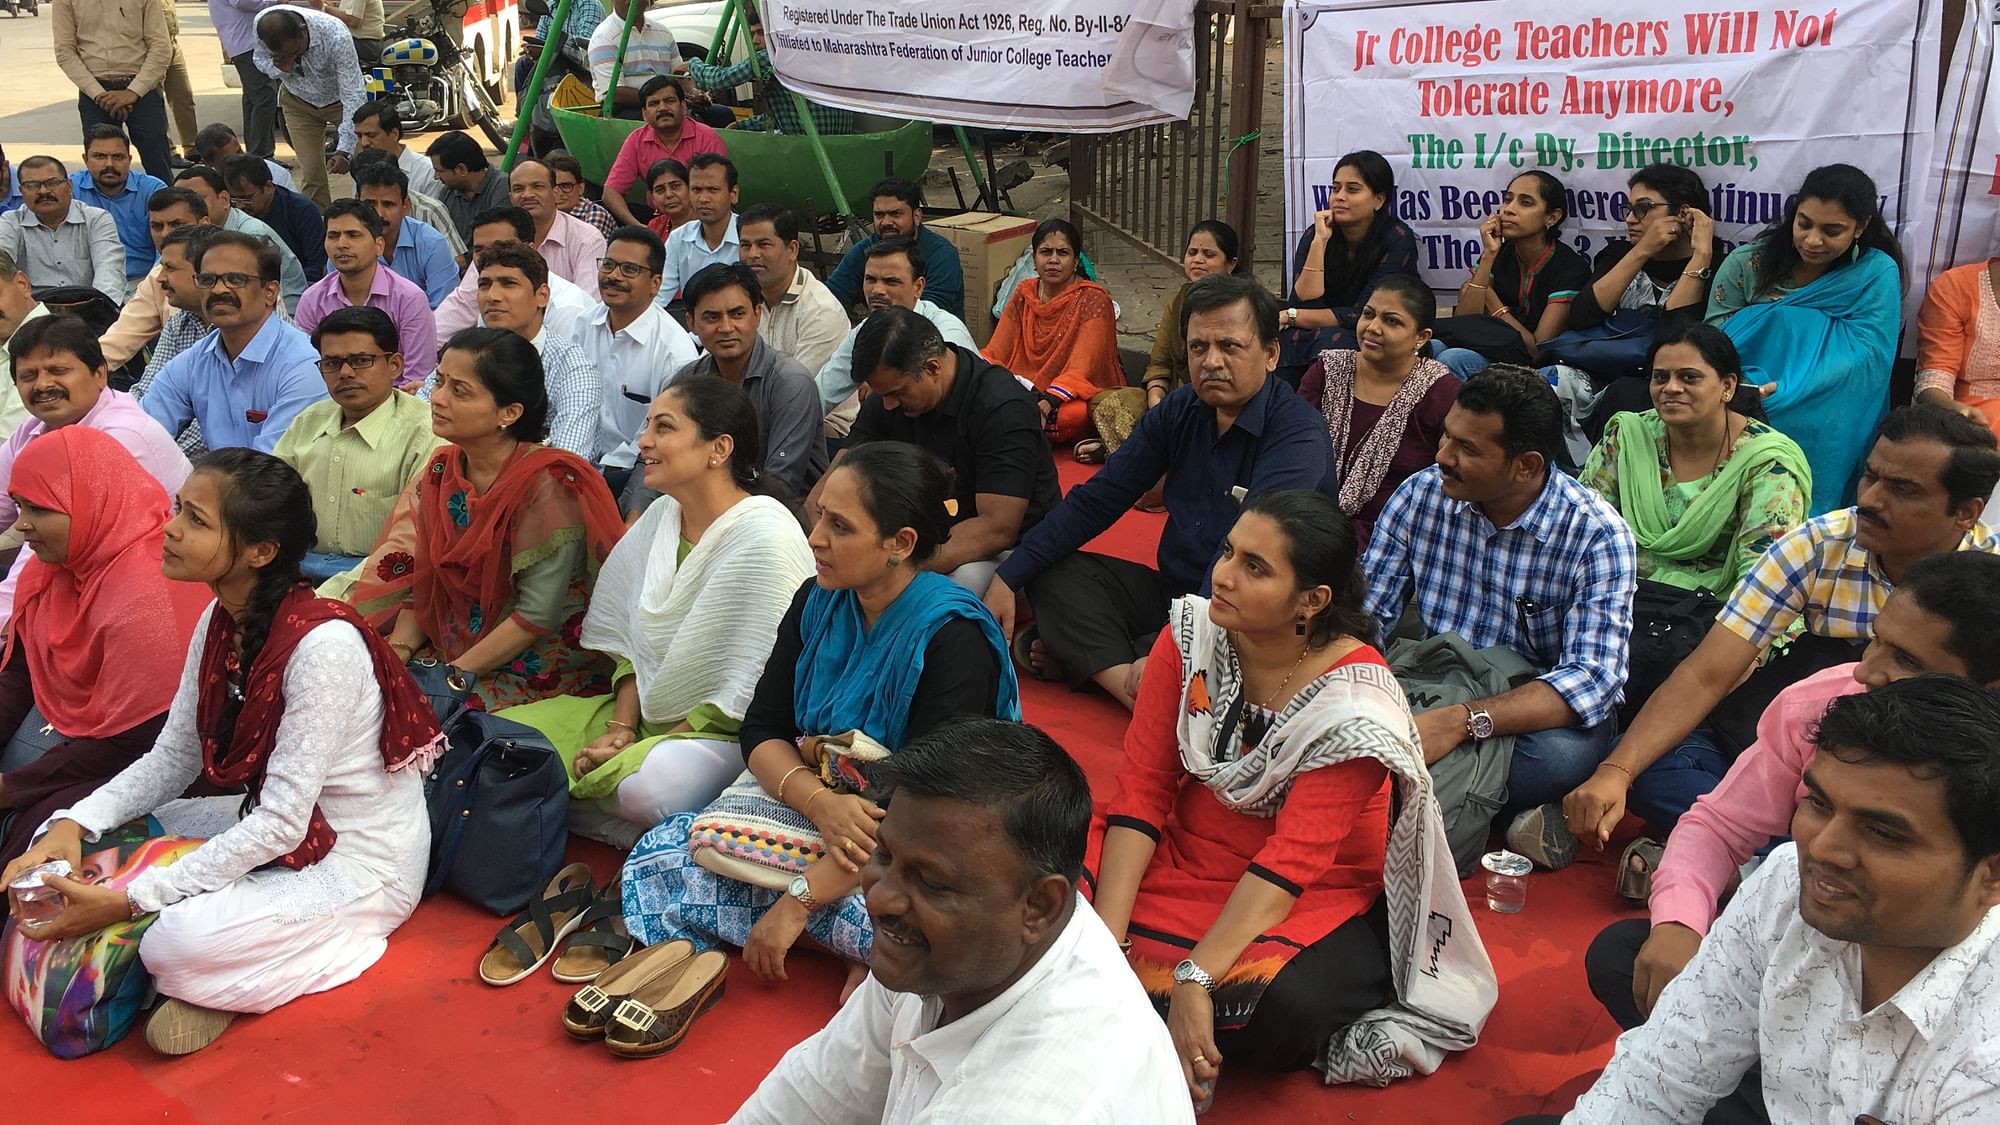 The agitation Mumbai Junior College Teachers Union (MJCTU) saw teachers demanding government action on clearing salaries that have been due for years now.